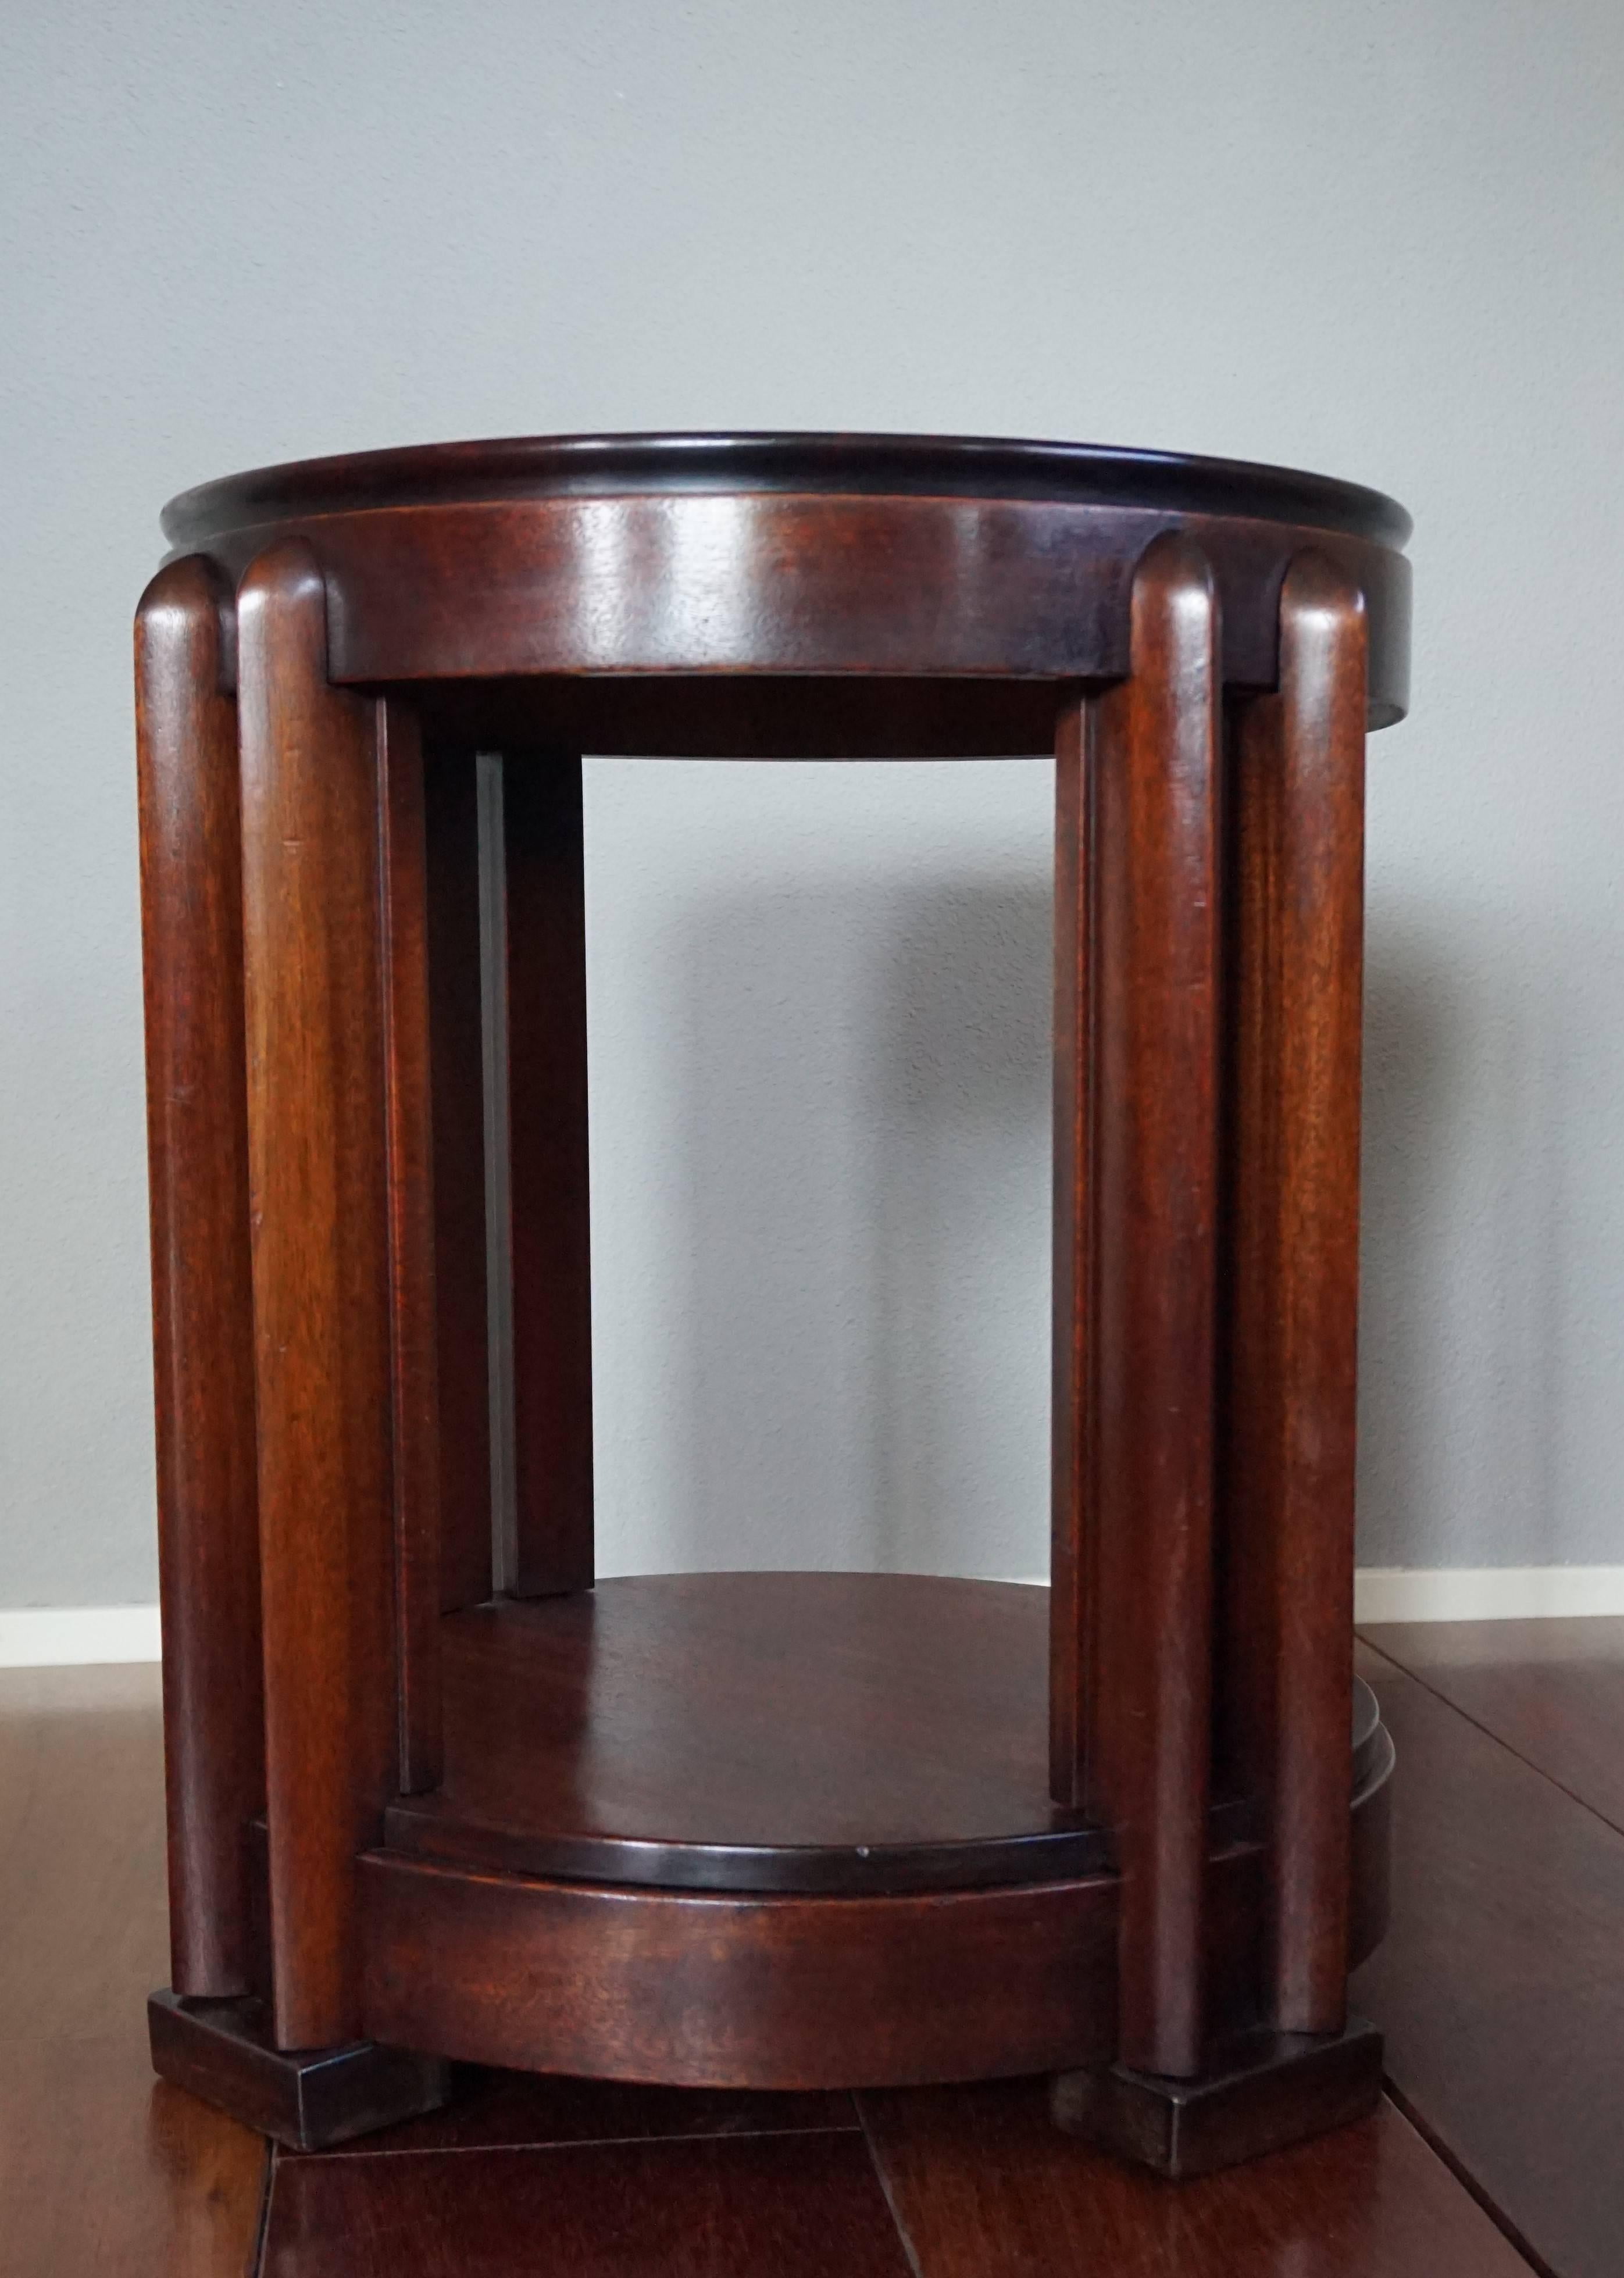 Stunning Mahogany Amsterdam School Occasional Table Attributed to Hildo Krop 1